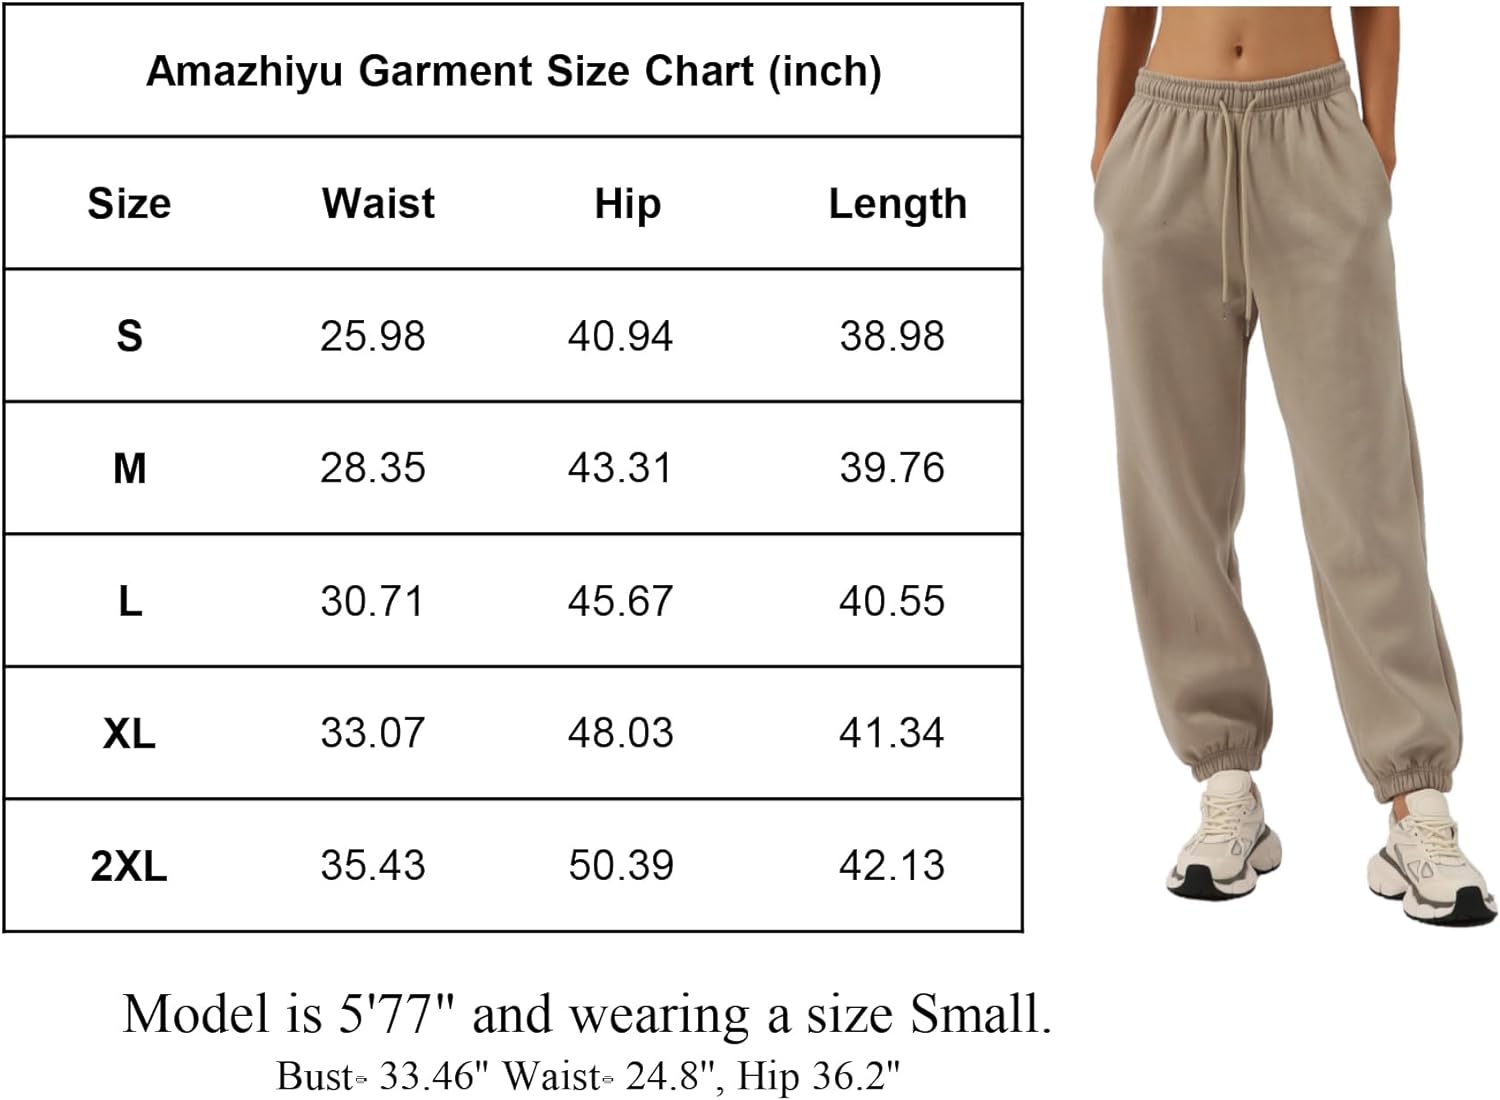 Hfyihgf Women's Joggers Sweatpants Drawstring Waisted Baggy Comfy Pants  Athletic Y2k Flower Print Lounge Trousers with Pockets(Green,XL)